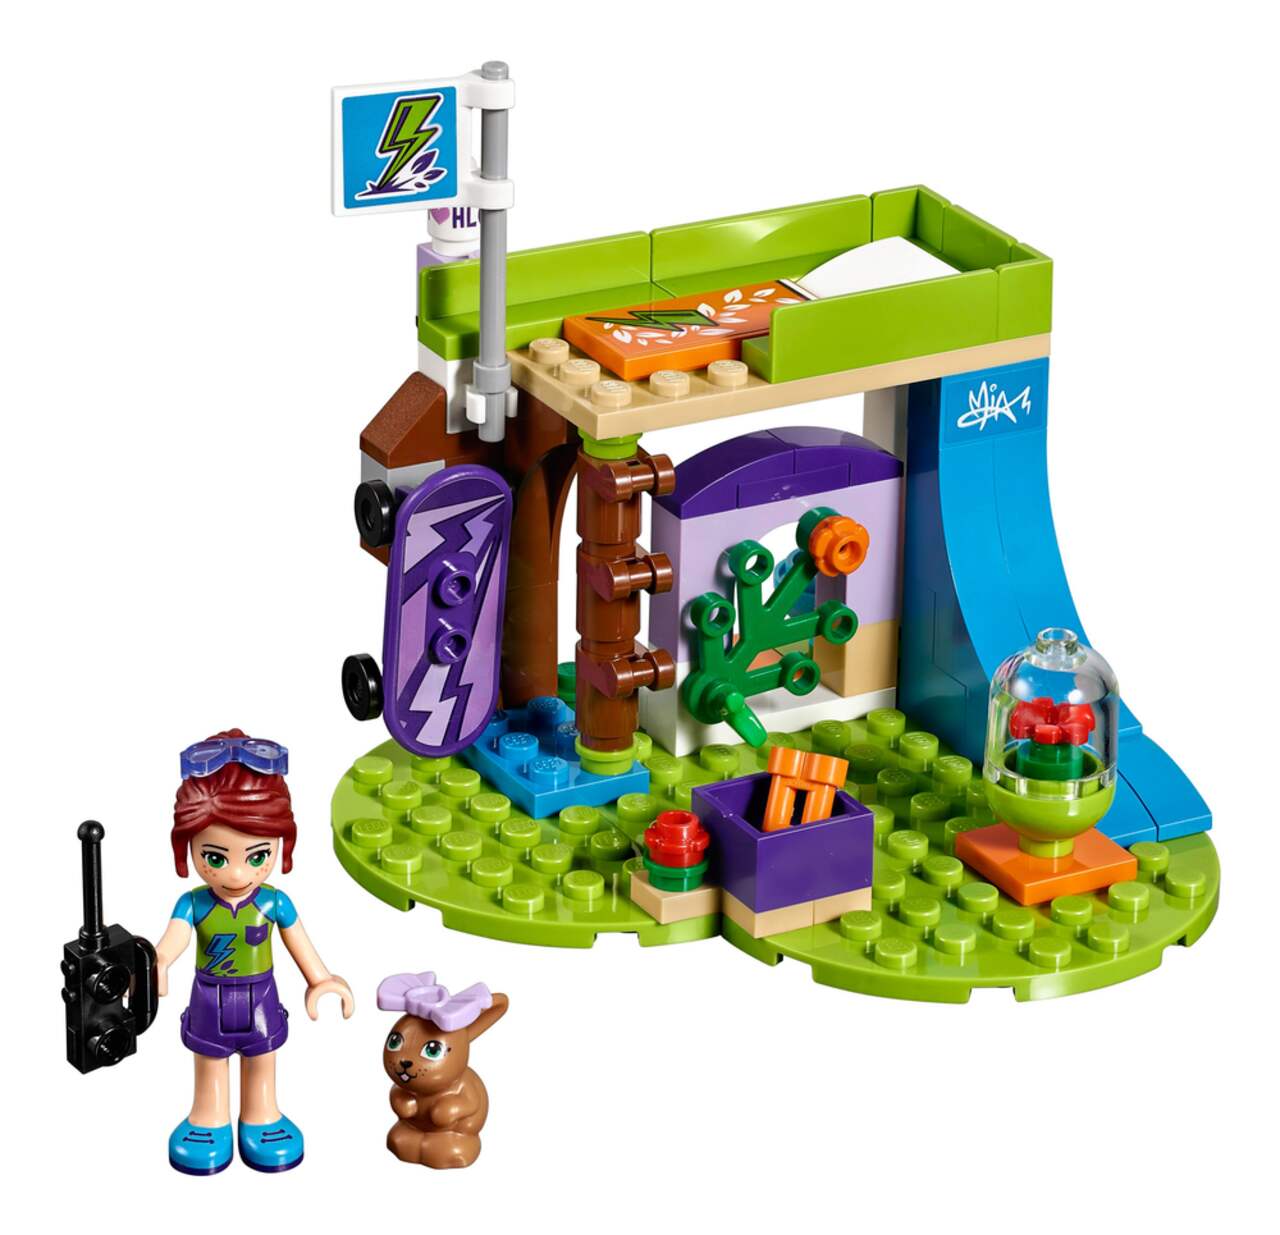 https://media-www.canadiantire.ca/product/seasonal-gardening/toys/toys-games/0503826/lego-mia-s-bedroom-de2c1222-527b-4ed7-89a4-bd4973801220.png?imdensity=1&imwidth=640&impolicy=mZoom